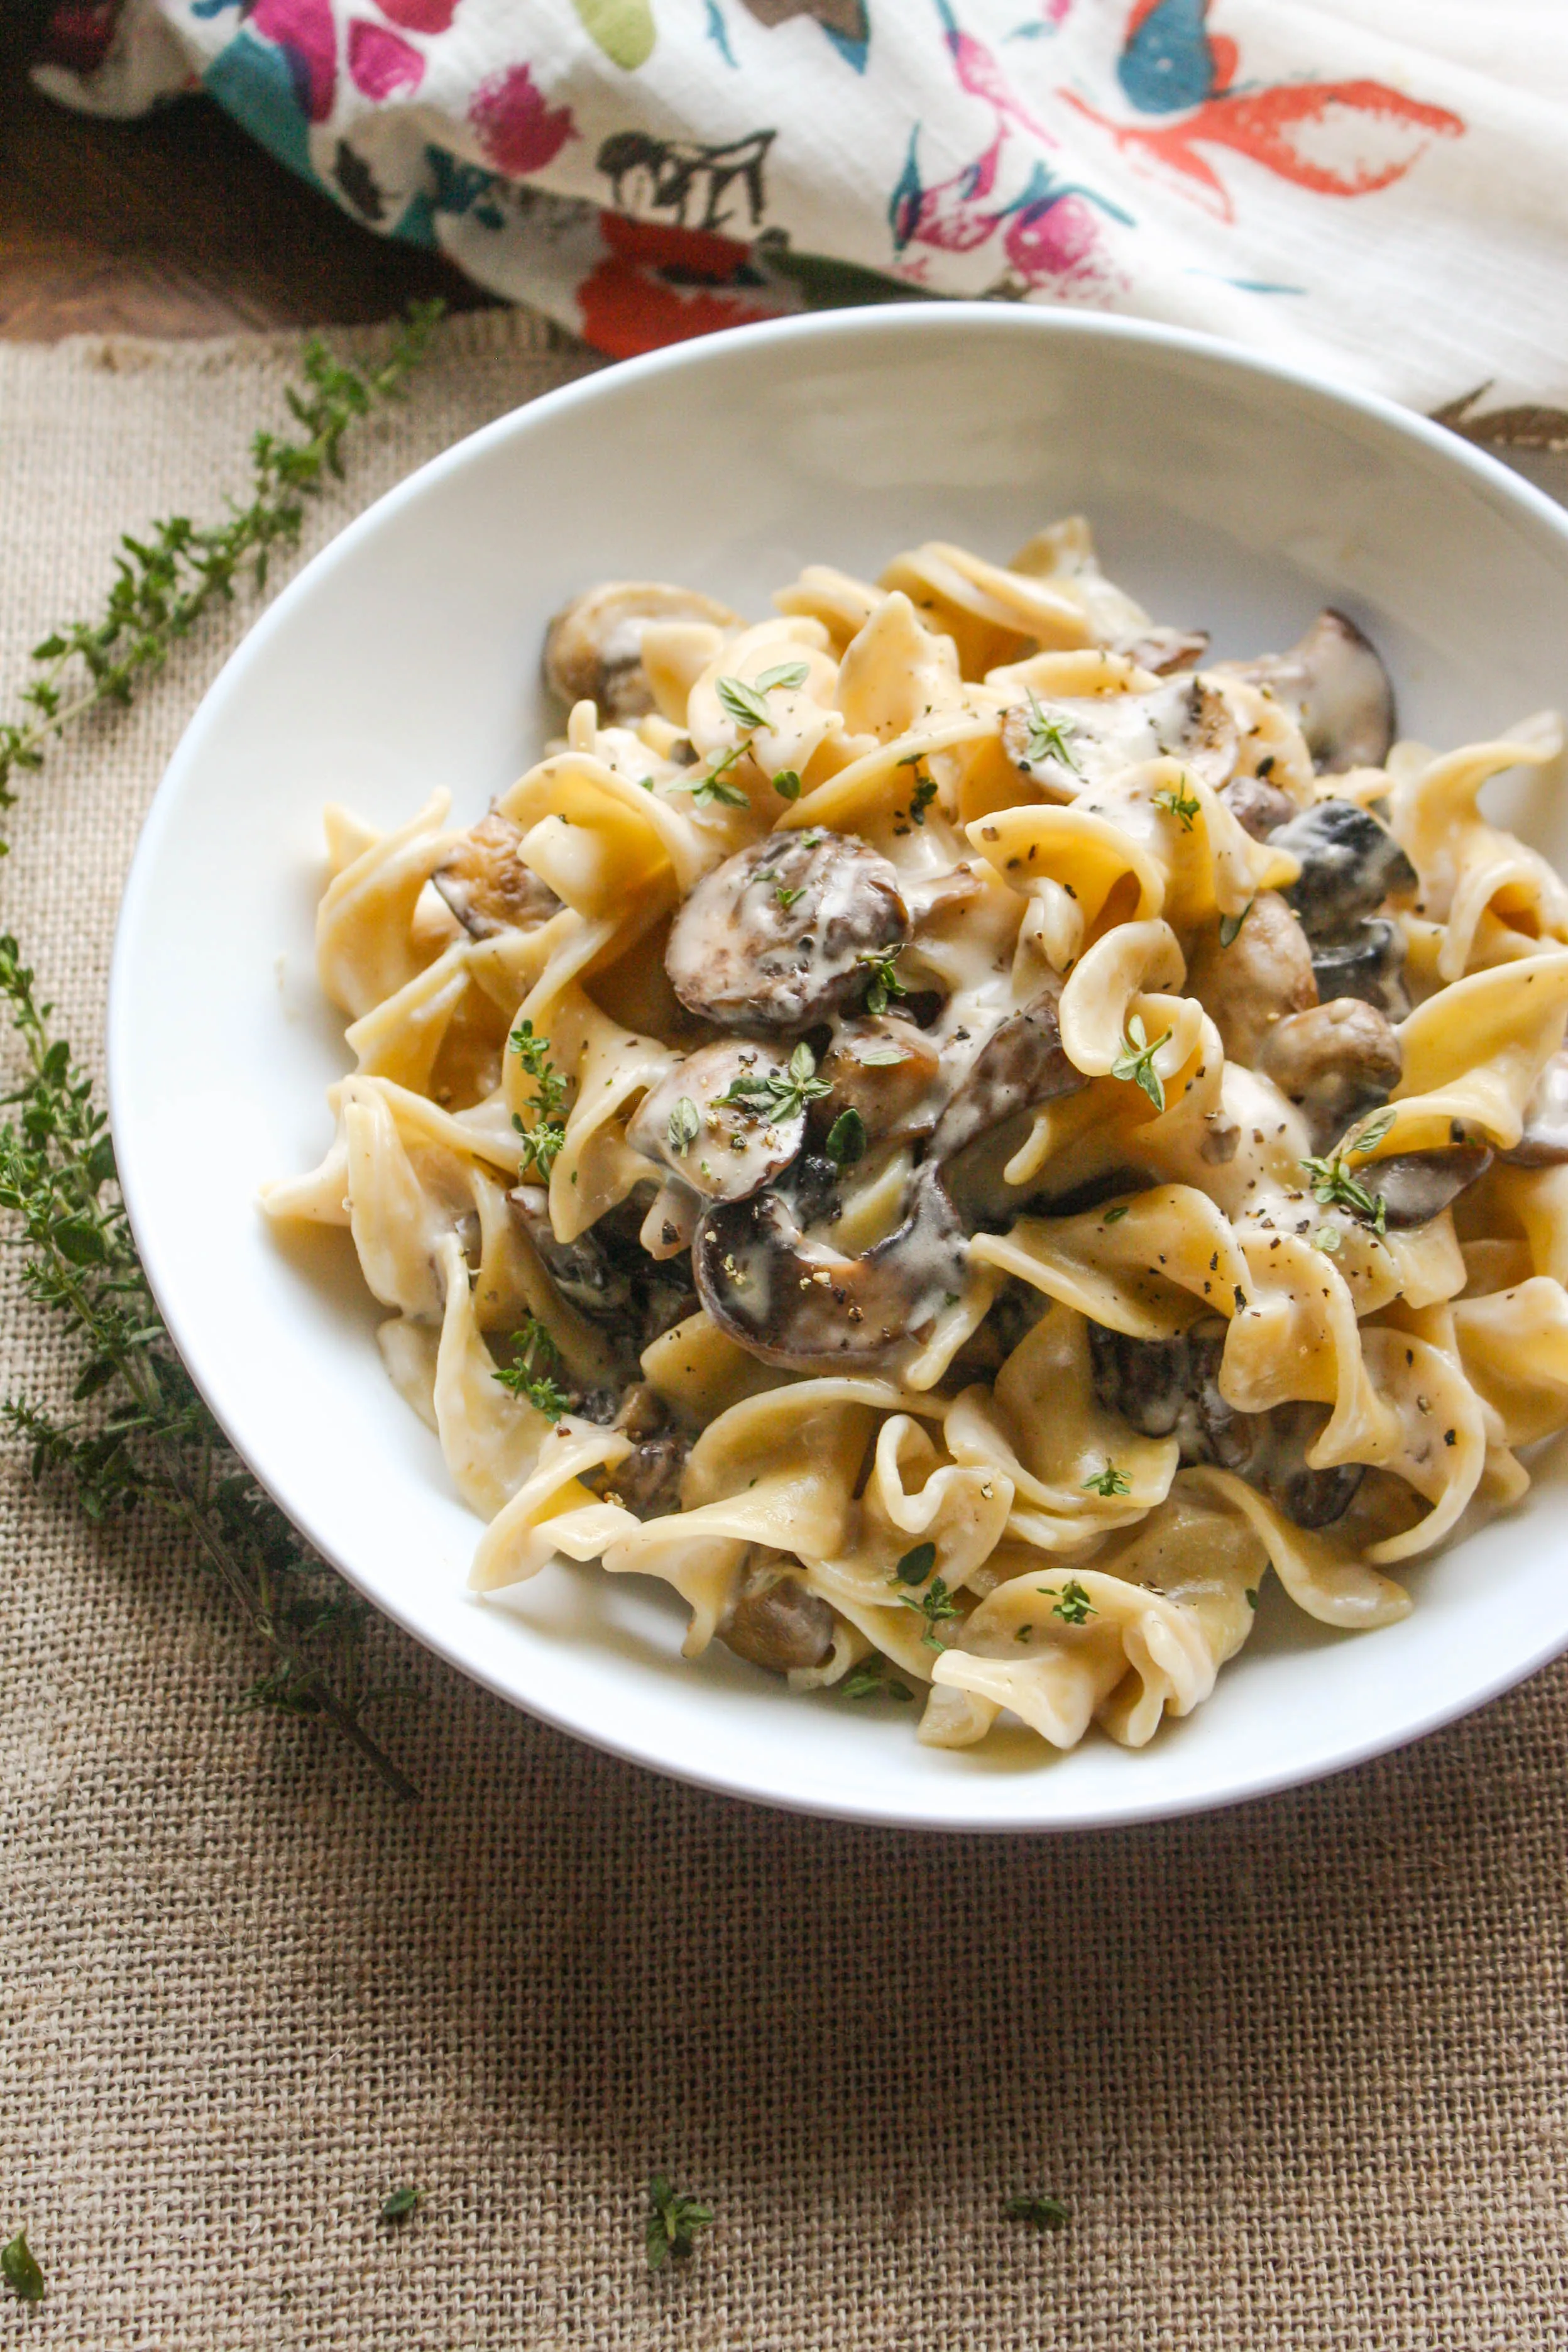 Mushroom Stroganoff is a flavorful and comforting meal perfect on a chilly night. You'll love this classic noodle dish with a twist!